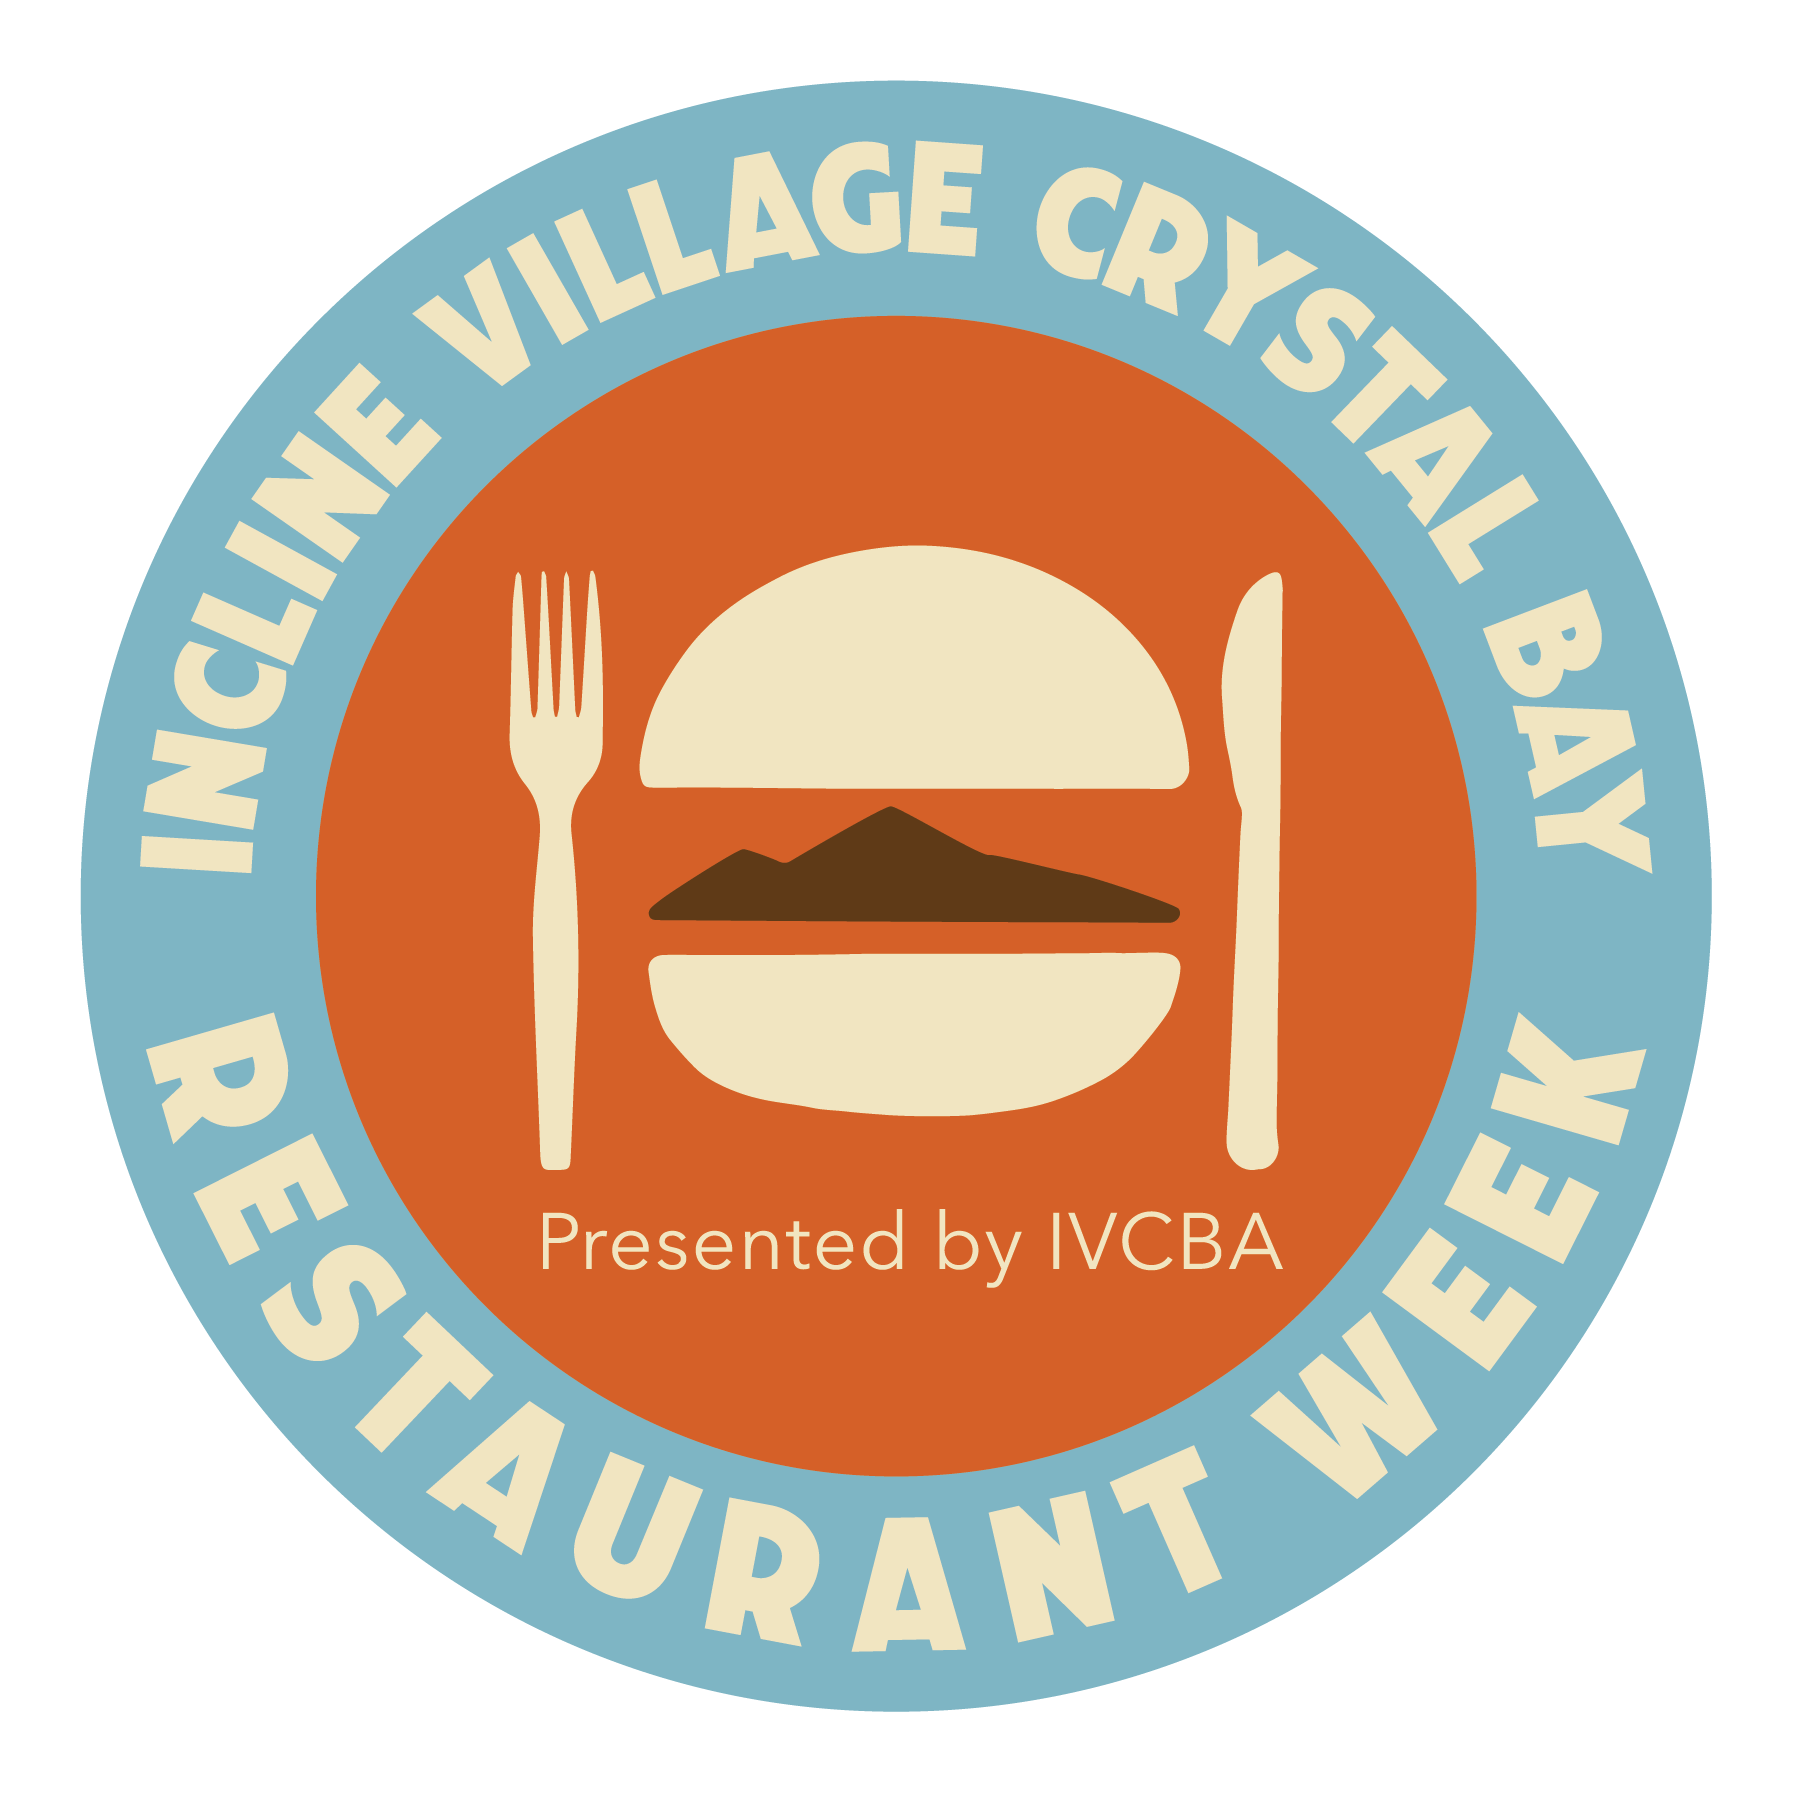 This is a logo for the Incline Village Crystal Bay Restaurant Week . It is an orange circle wth a hamburger, fork and kinife inside a larger blue circle with text.